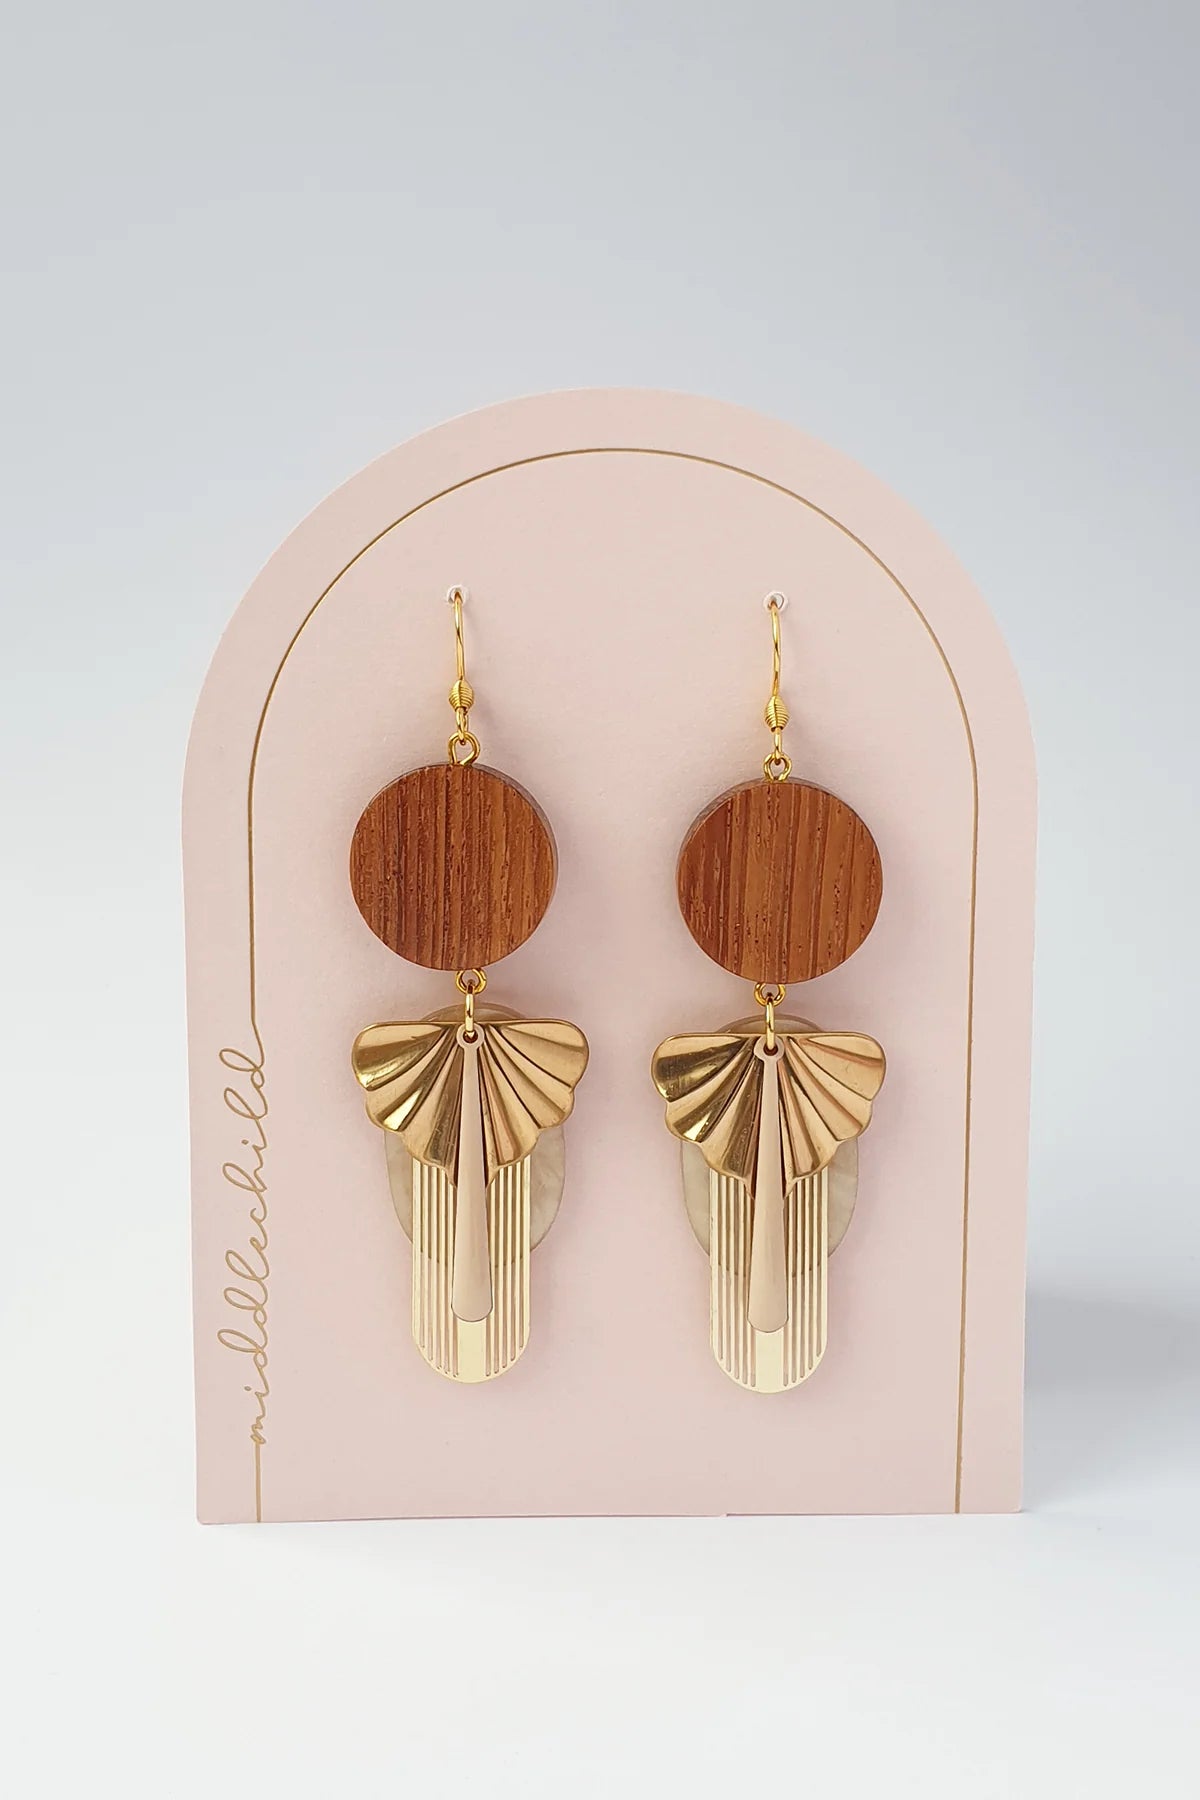 Middle Child - Heartsong Earrings